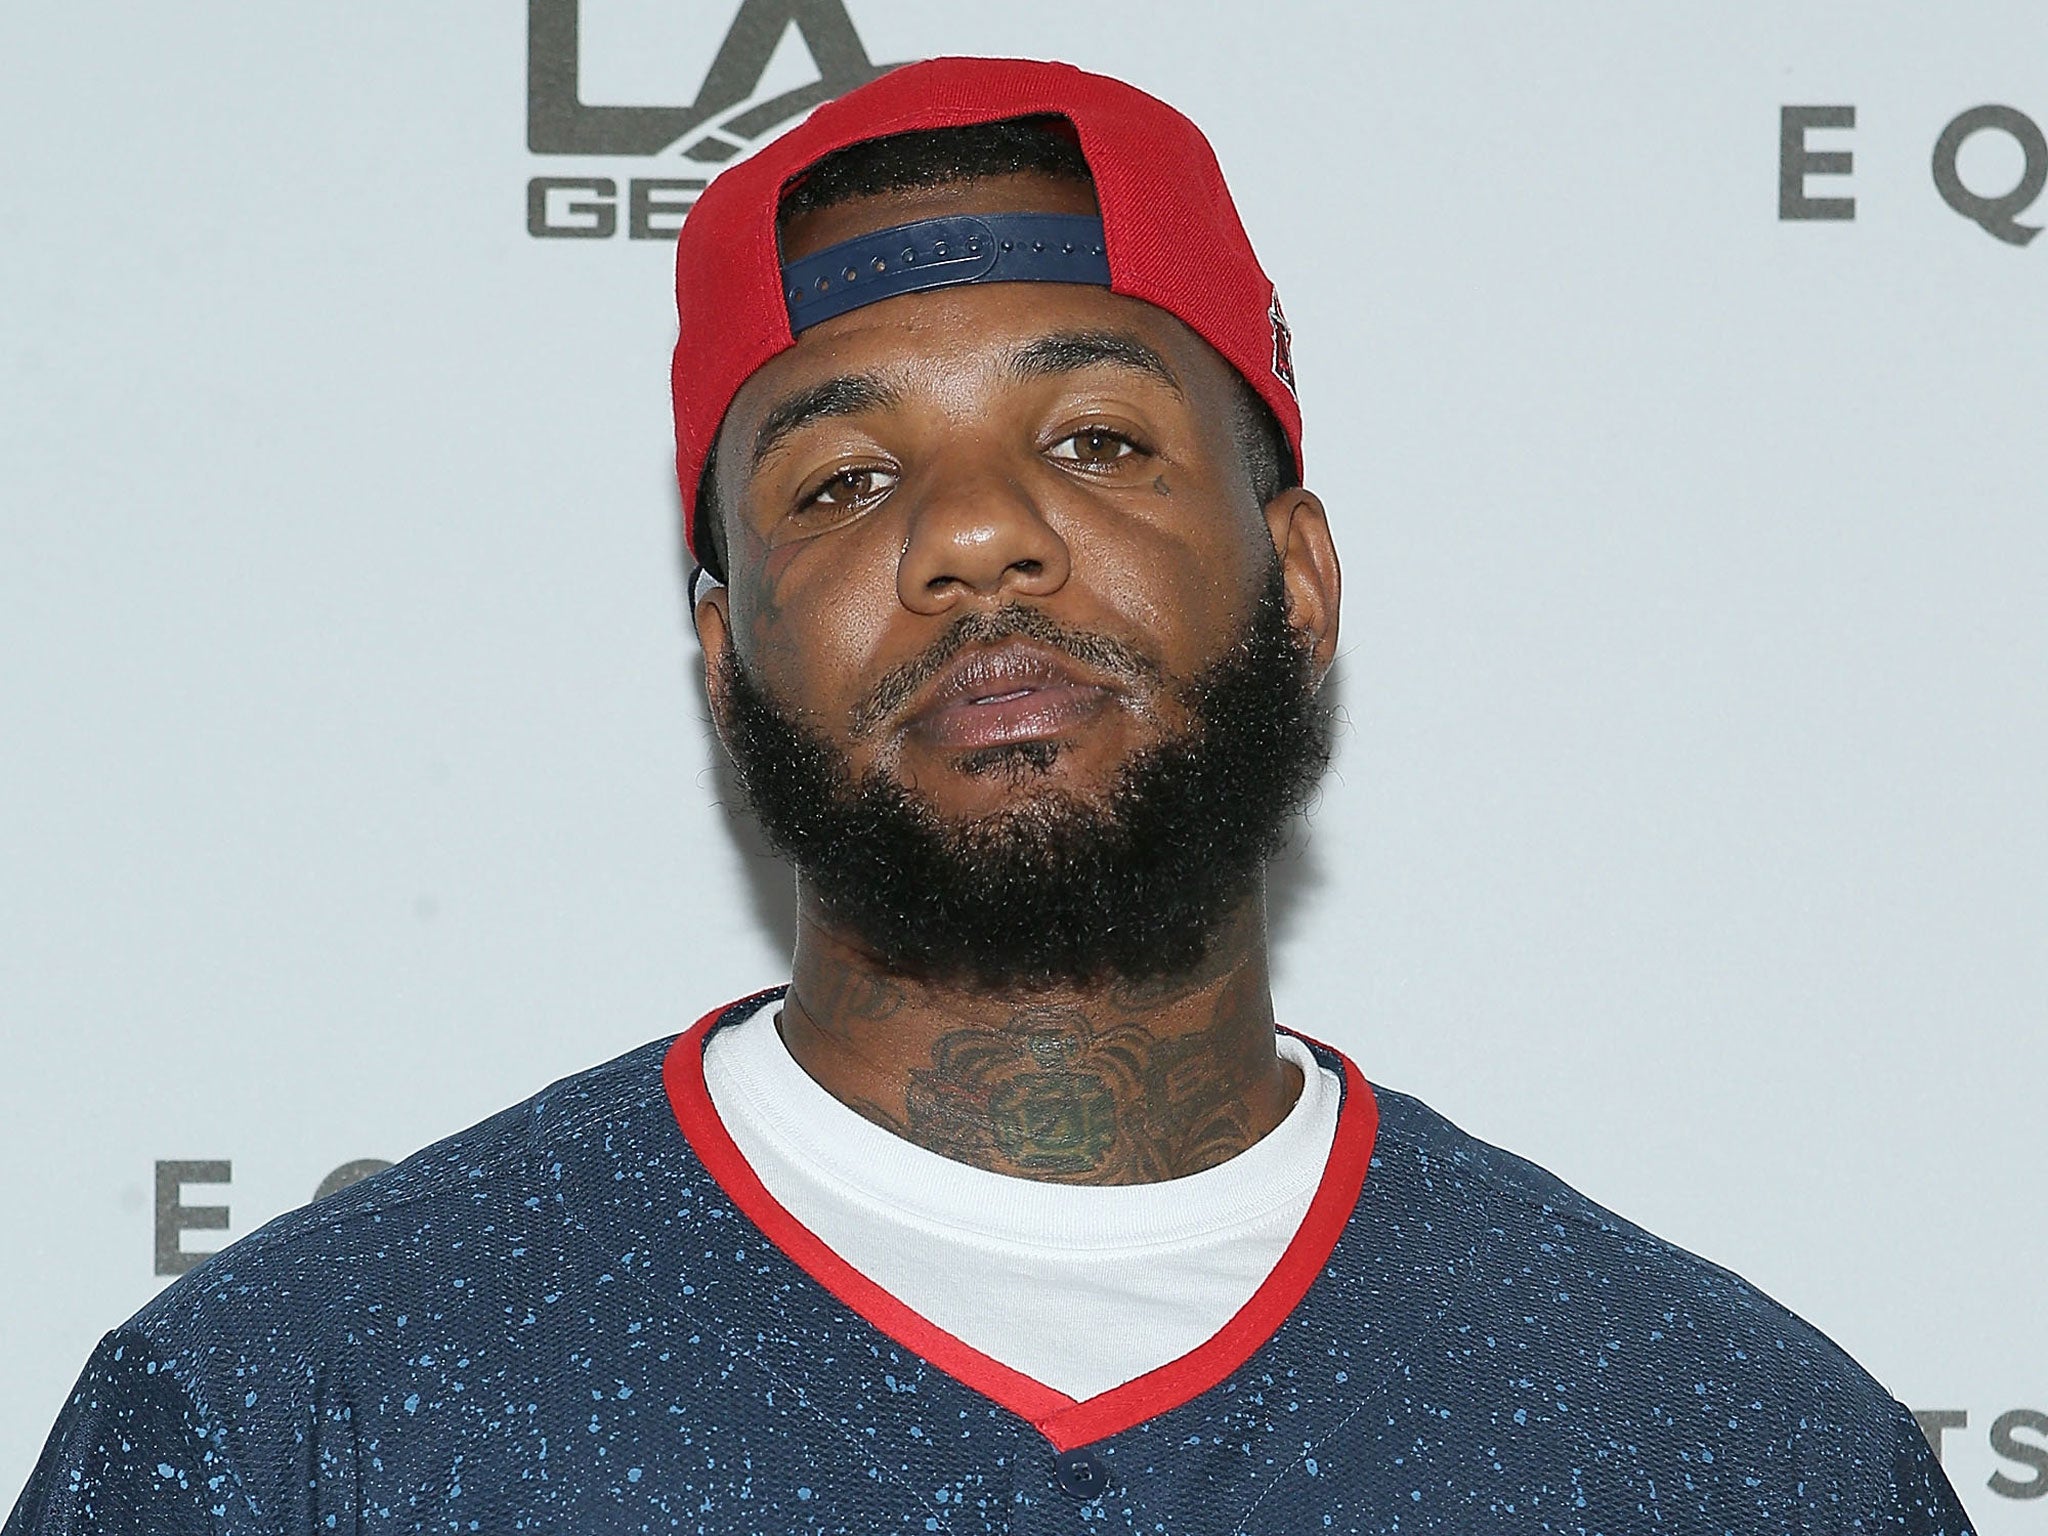 The Game, real name Jayceon Terrell Taylor, has been arrested for allegedly punching an off-duty police officer